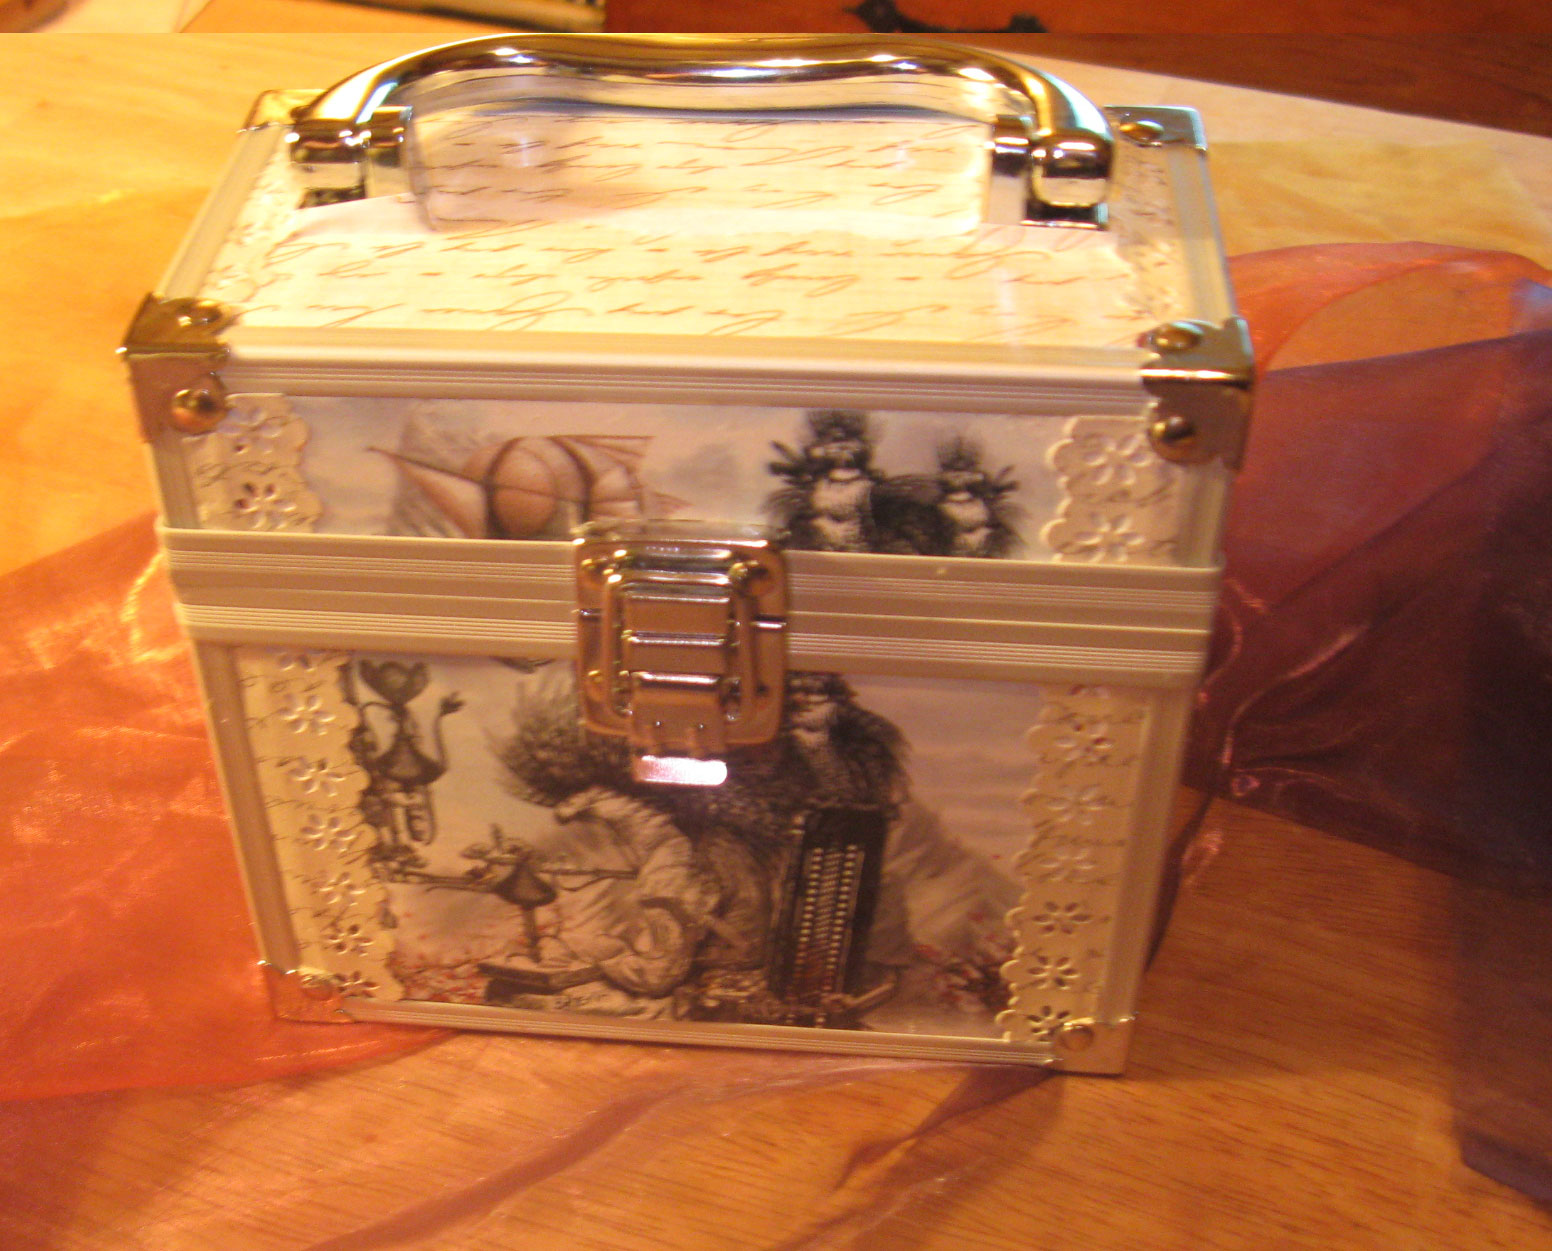 The Attic Shoppe Trading Co OOAK Box Purses Airships and the Macabre by Bethalynne Bajema